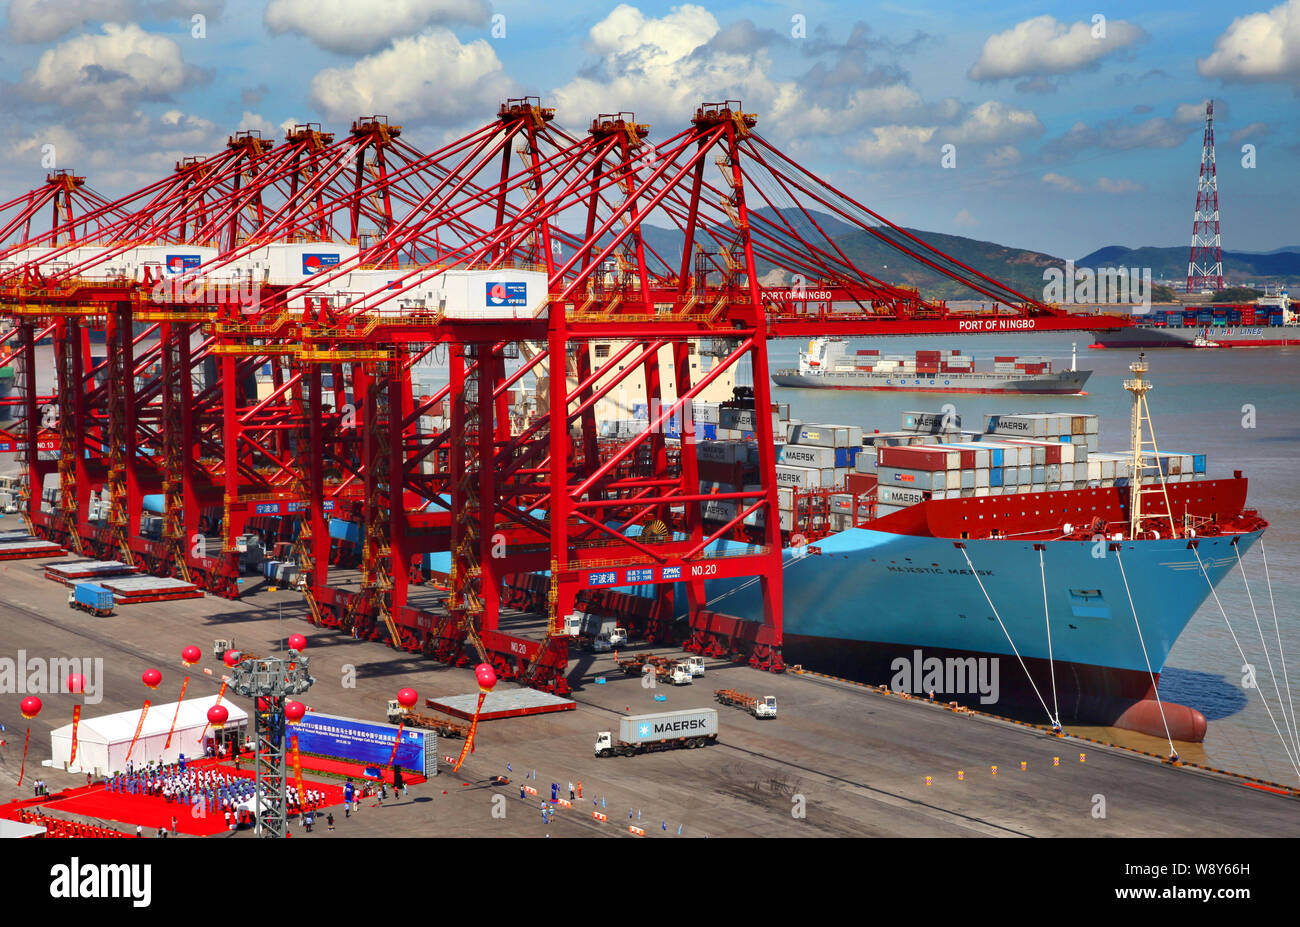 --FILE--The Majestic Maersk container ship of Maersk Line docks at the Port of Ningbo in Ningbo city, east Chinas Zhejiang province, 16 August 2013. Stock Photo